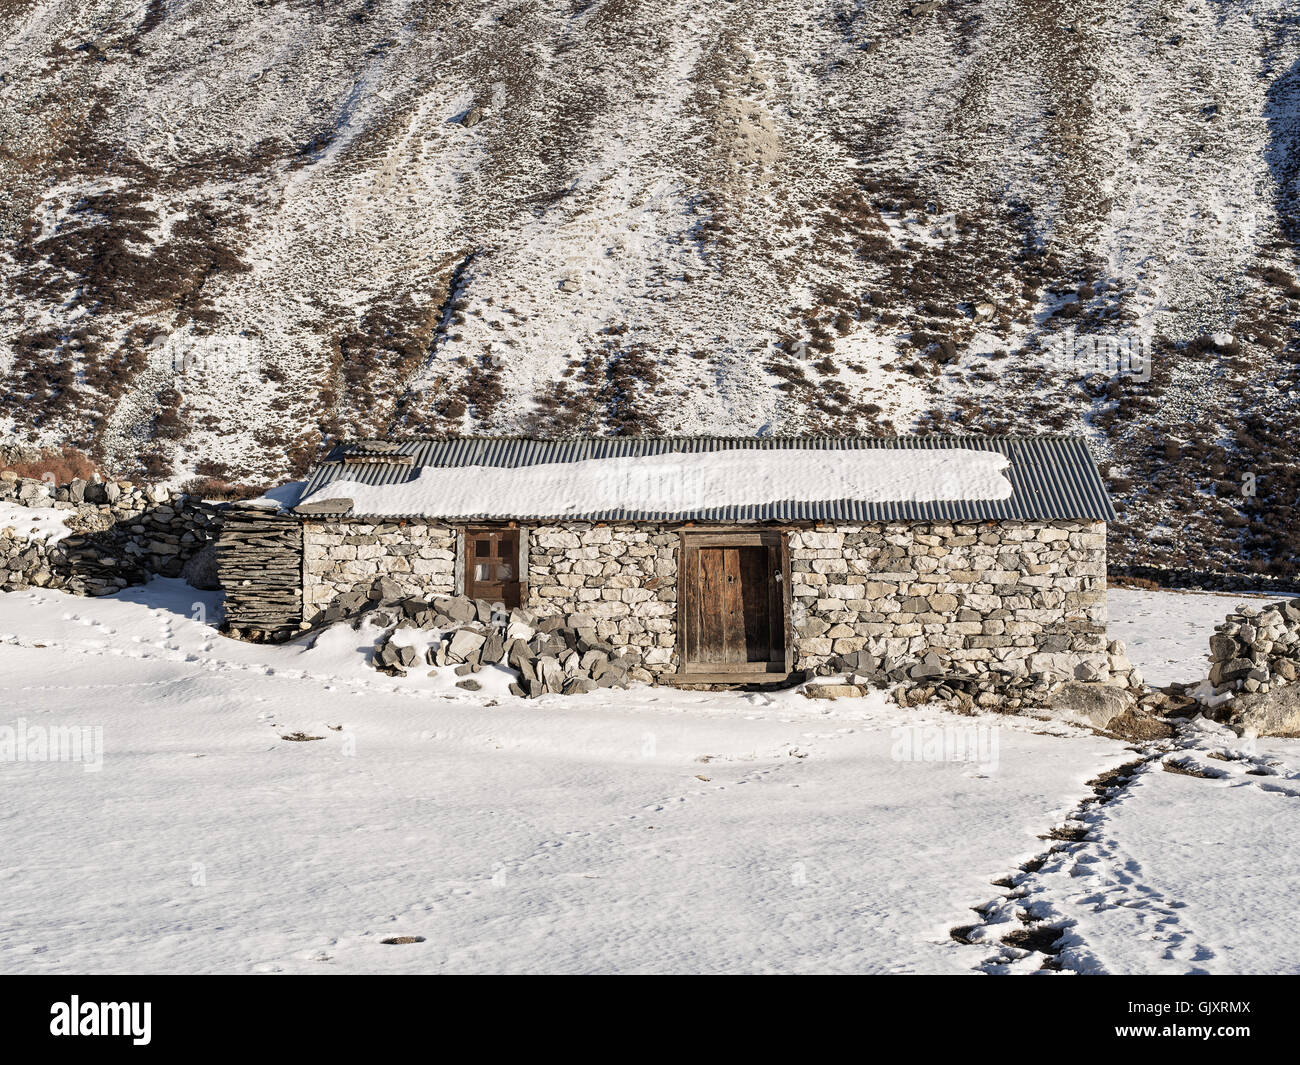 A house in Nepal's Everest Base Camp Stock Photo